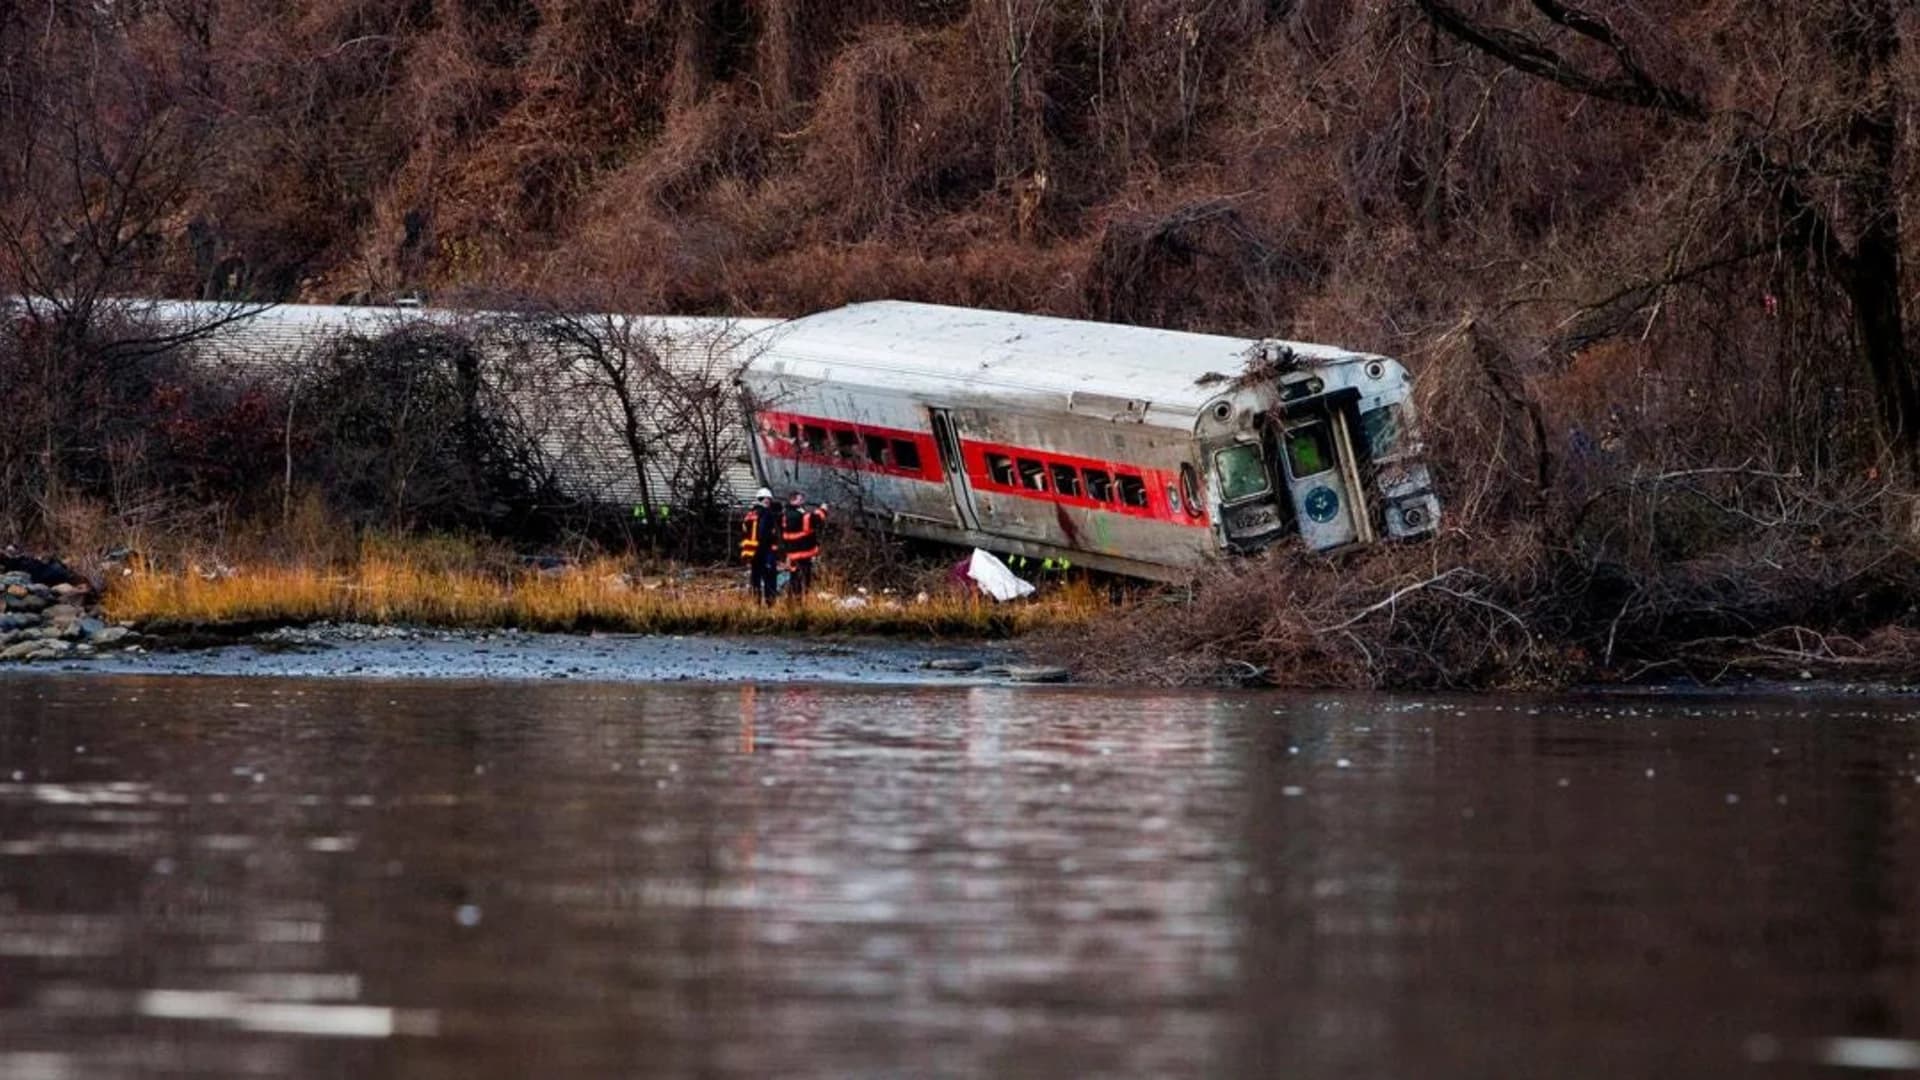 Photos: A look back at the 2013 Metro-North derailment, 5 years later